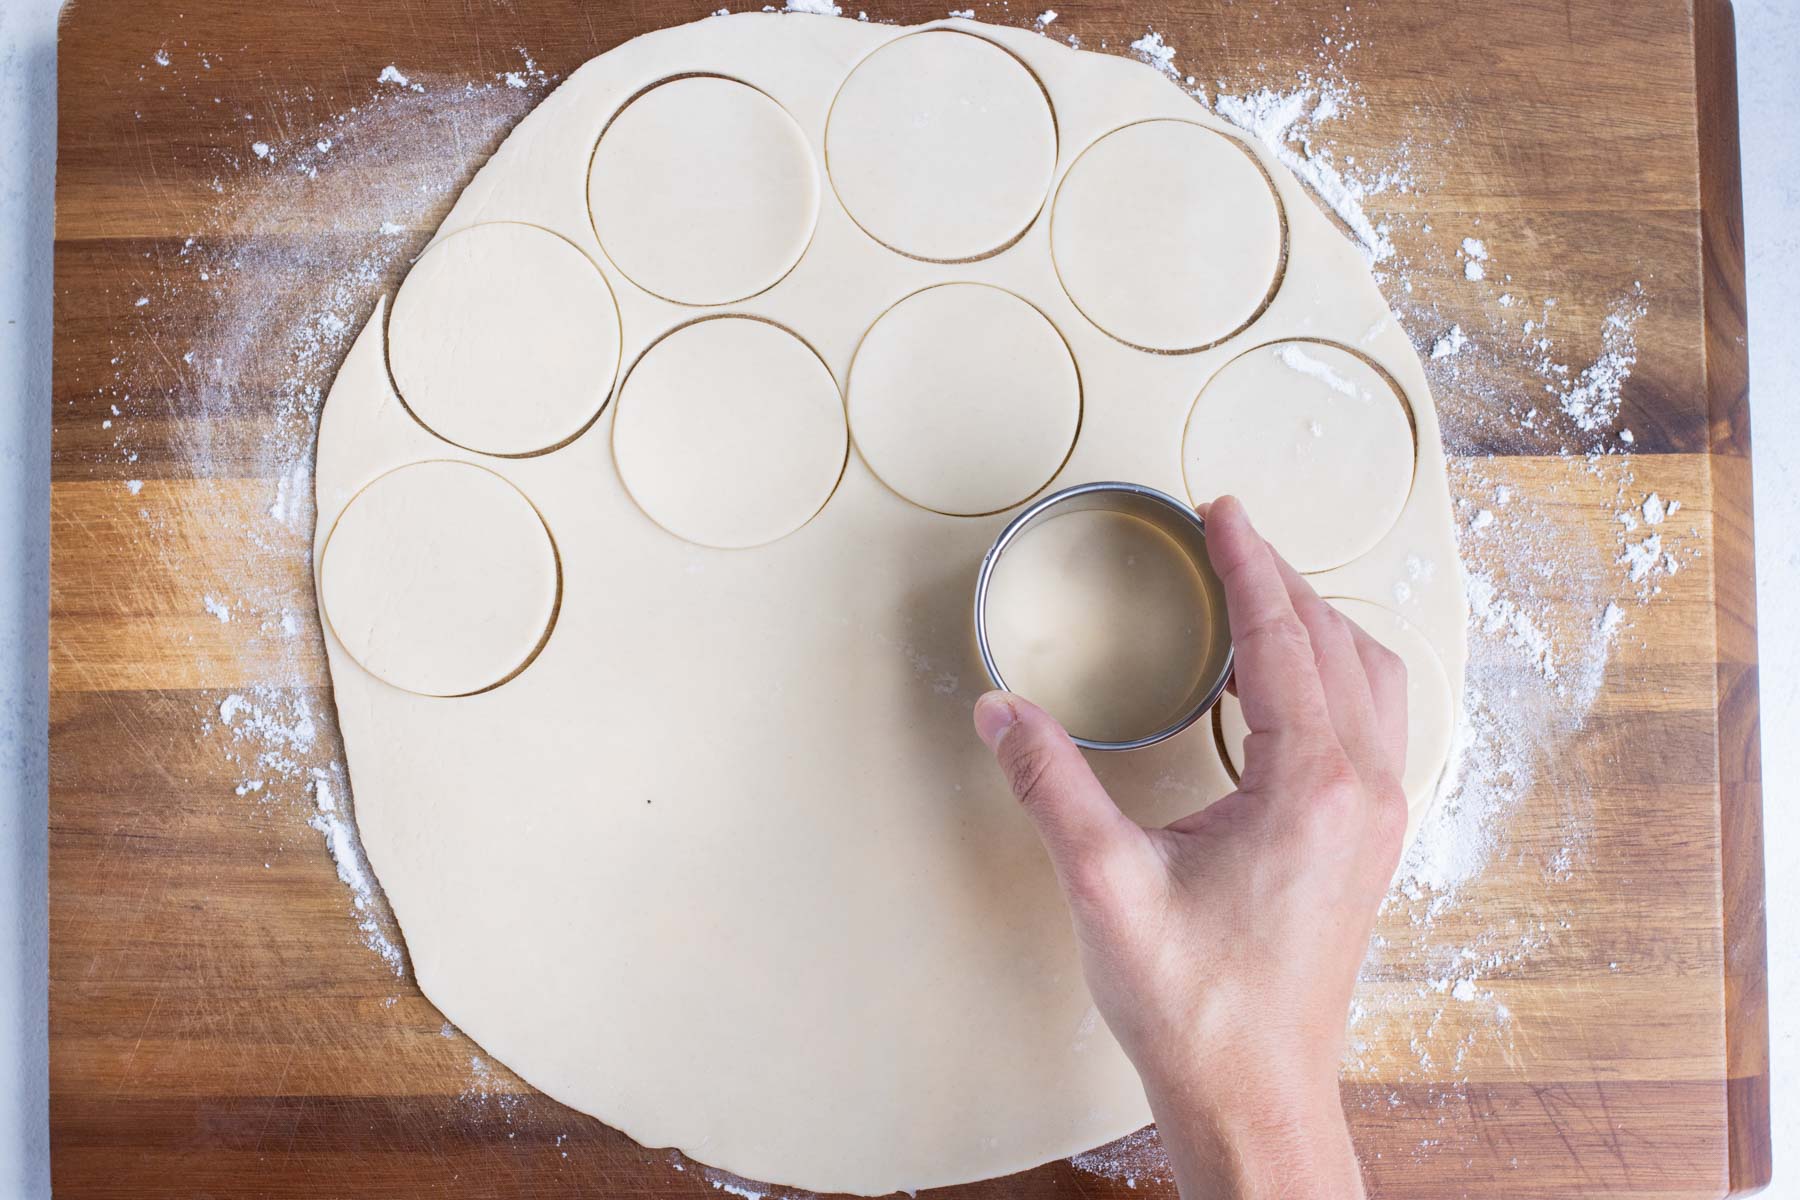 48 mini circles are cut out of the pie crust.